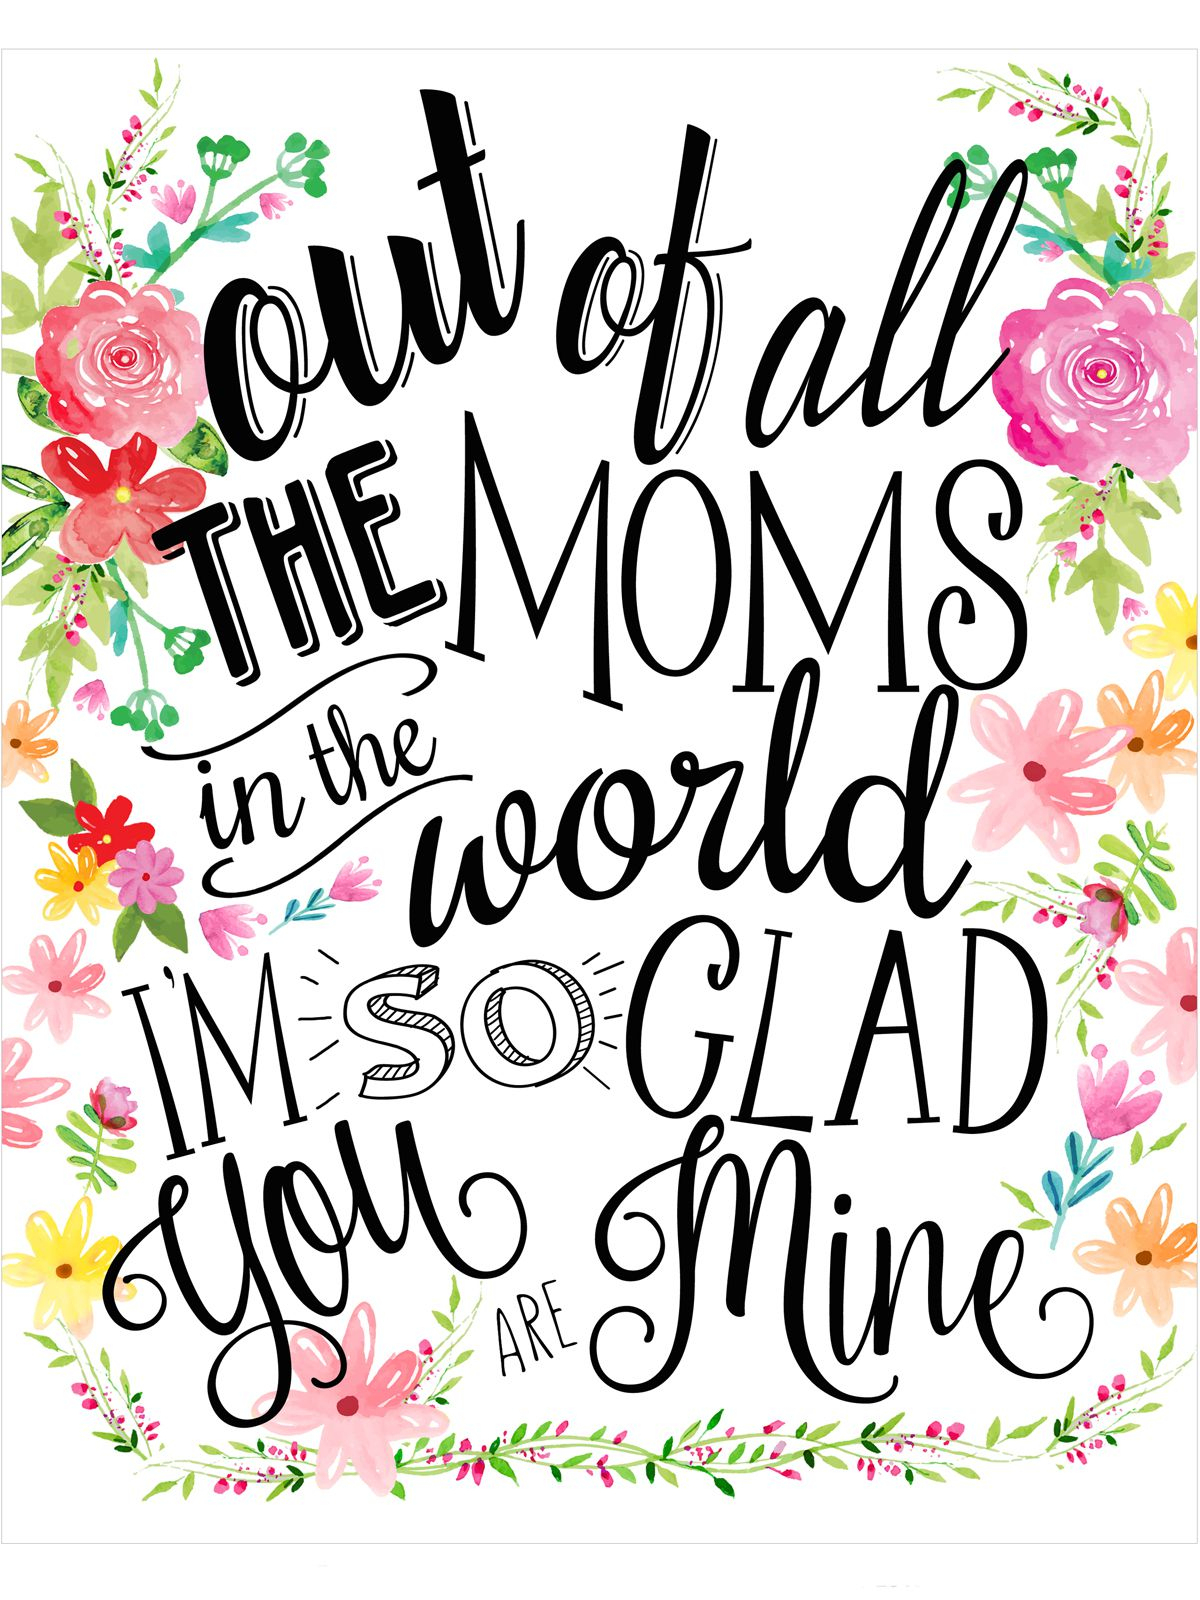 mothers-day-card-drawing-free-download-on-clipartmag